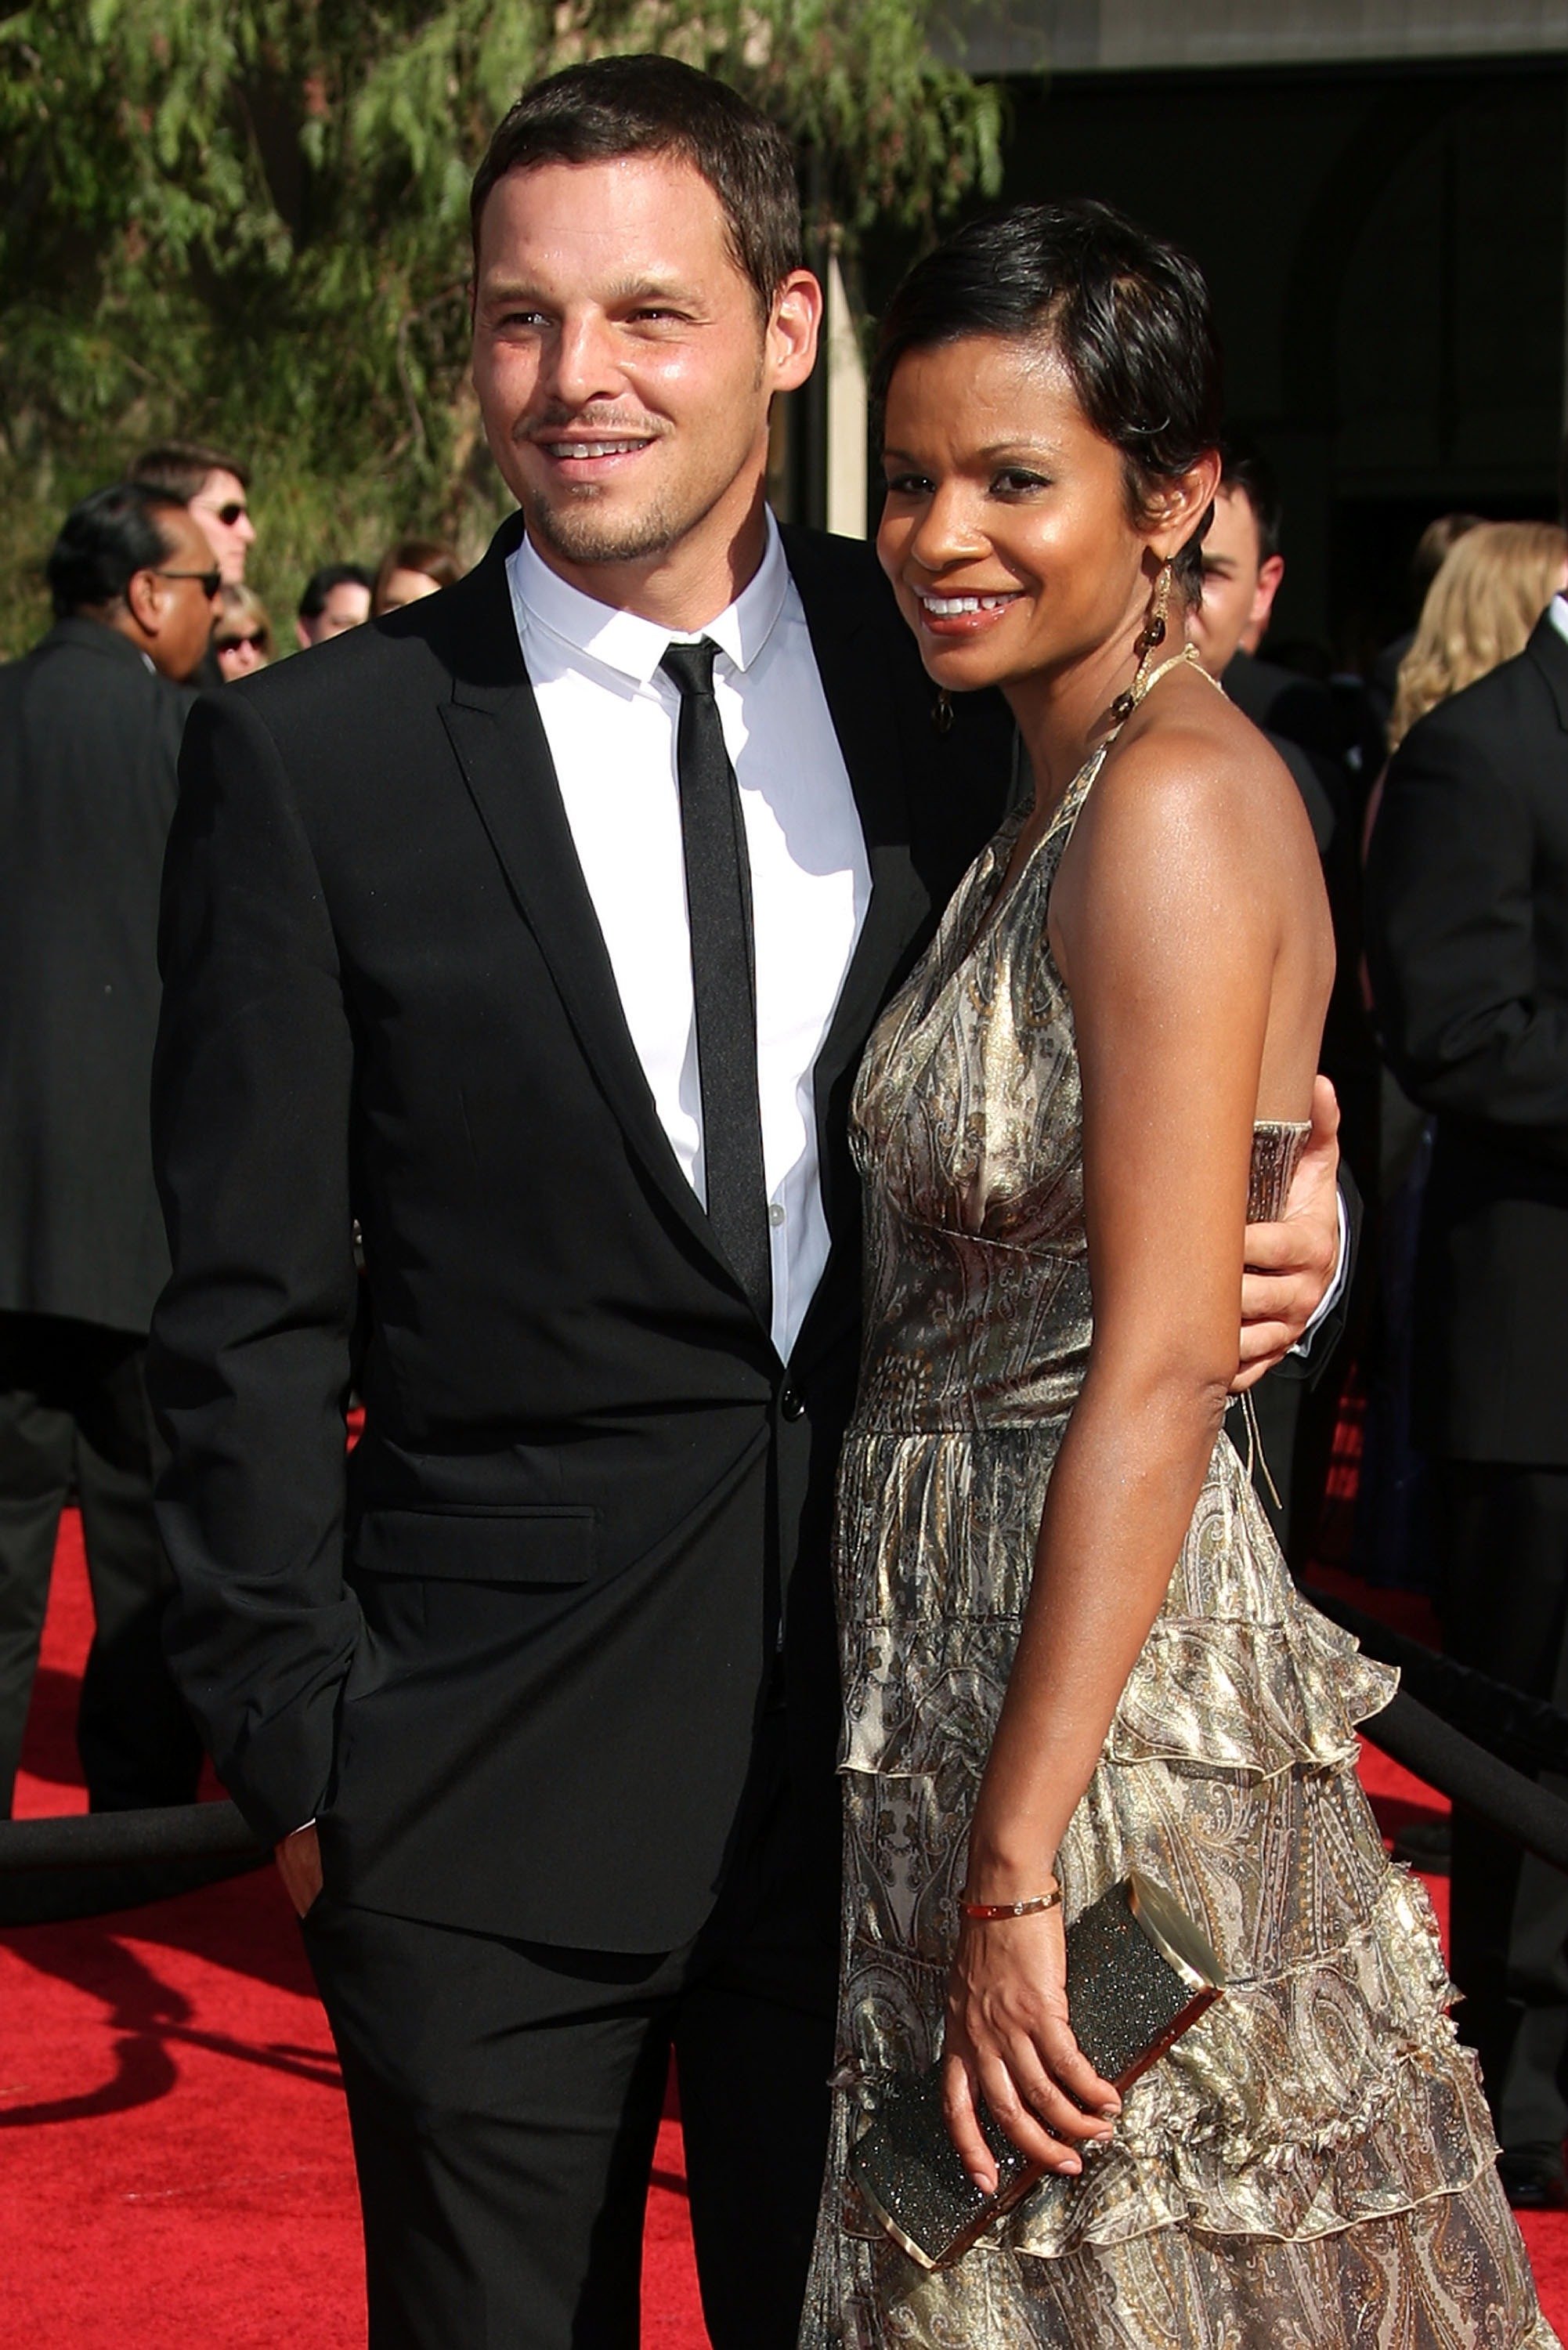 Actor Justin Chambers and his wife Keisha Chambers arrive at the 59th Annual Primetime Emmy Awards at the Shrine Auditorium on September 16, 2007 | Source: Getty Images